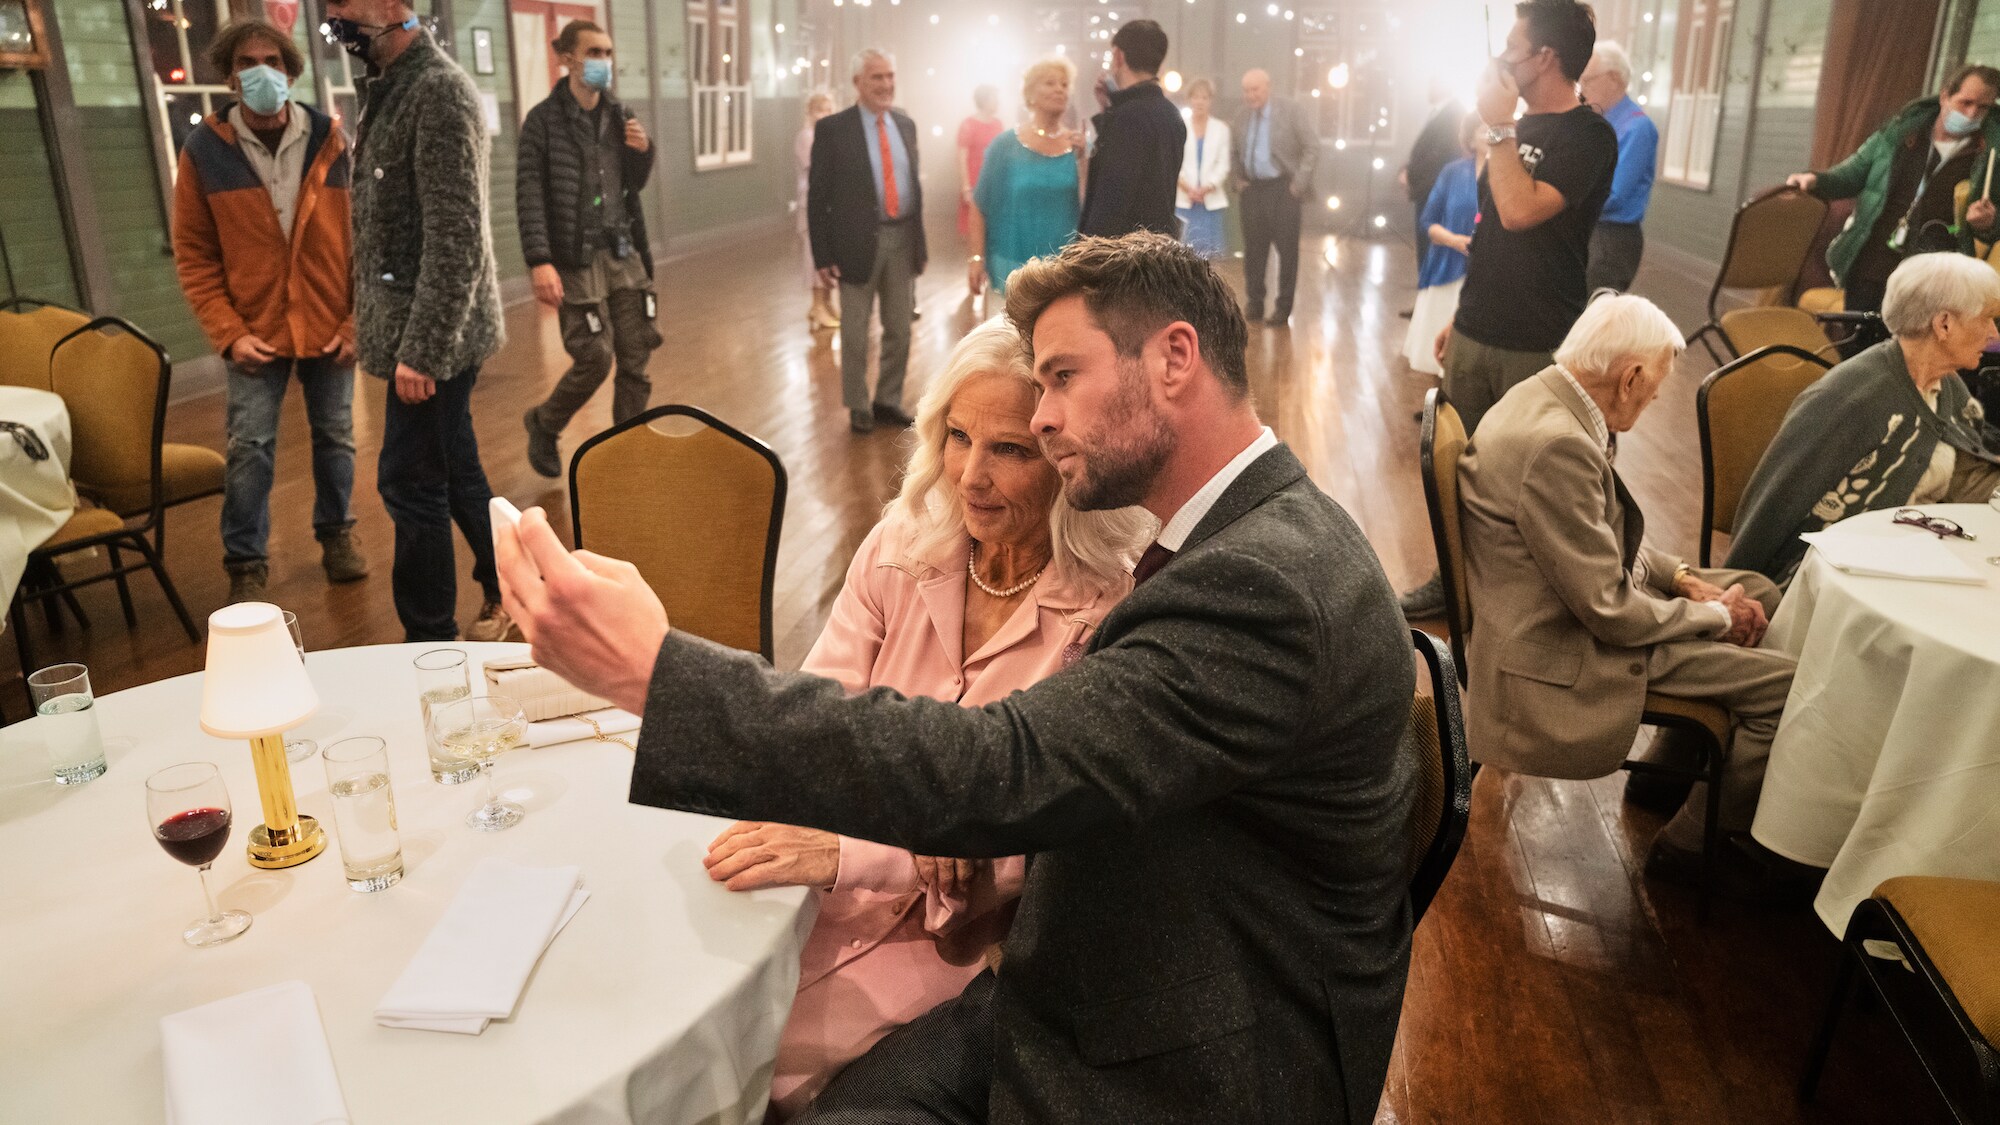 Chris Hemsworth and Elsa take a selfie at the dance. (National Geographic for Disney+/Craig Parry)